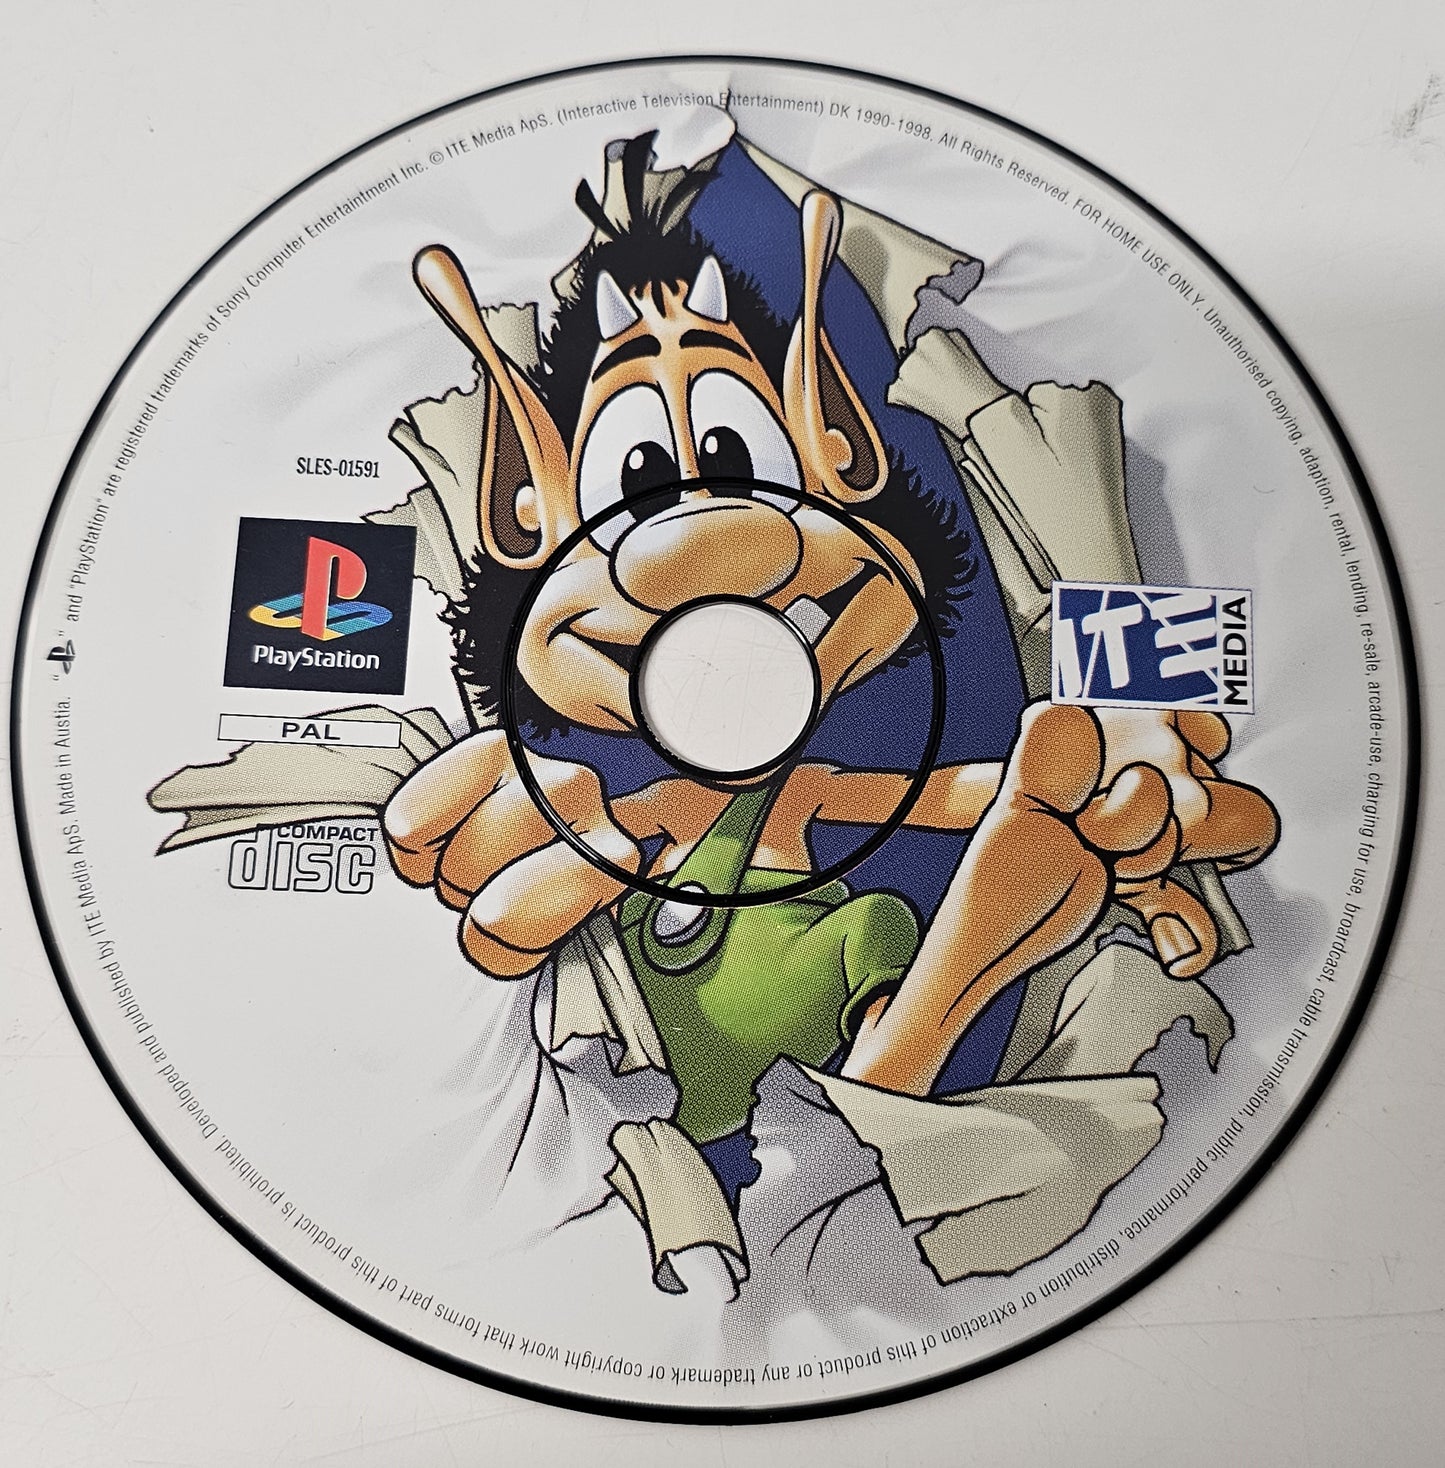 PS1 Playstation 1 Hugo (Disc Only)